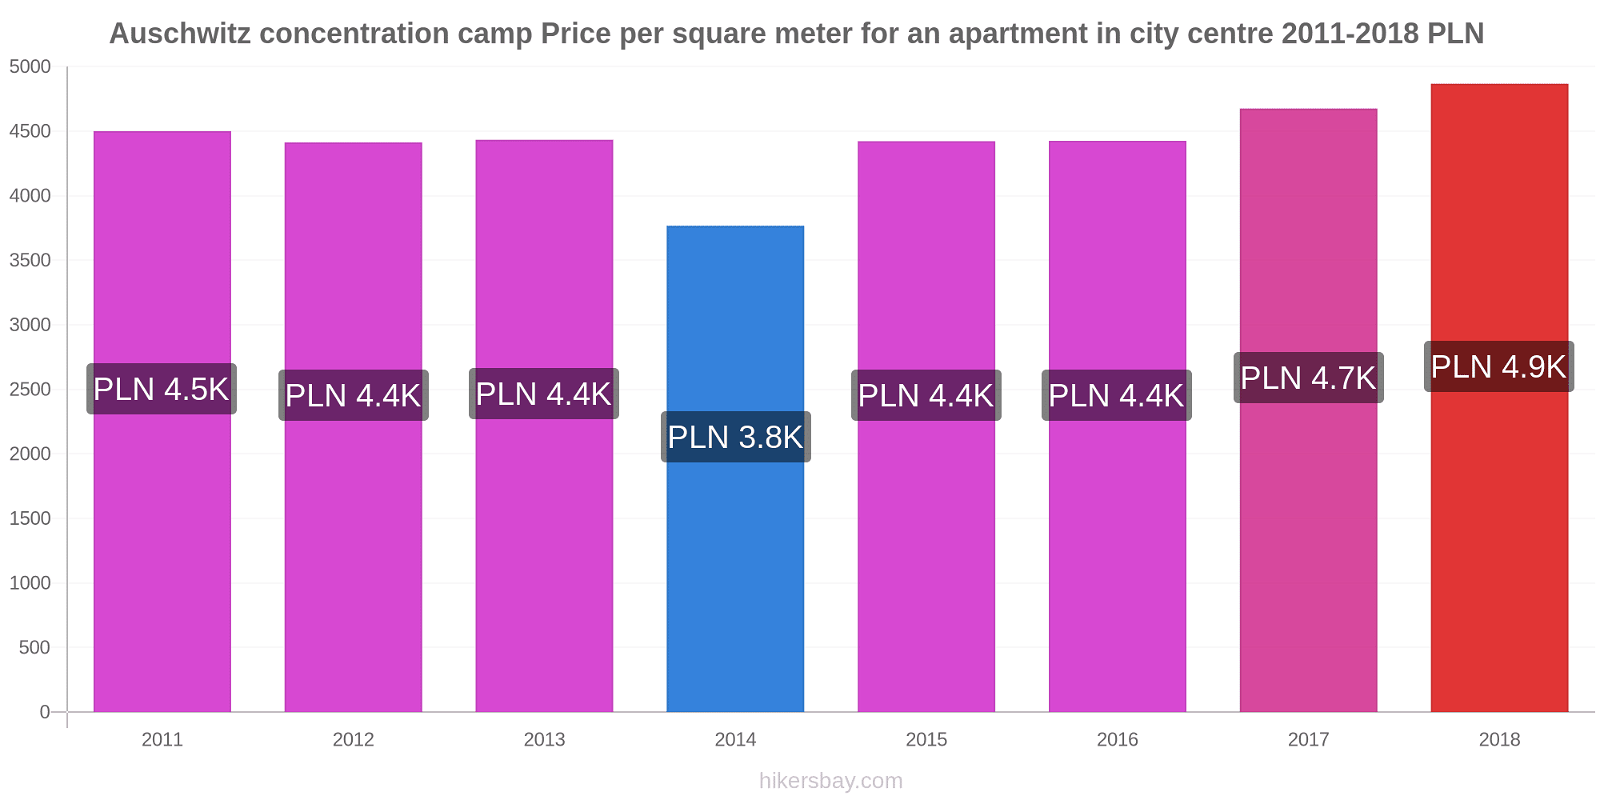 Auschwitz concentration camp price changes Price per square meter for an apartment in city centre hikersbay.com